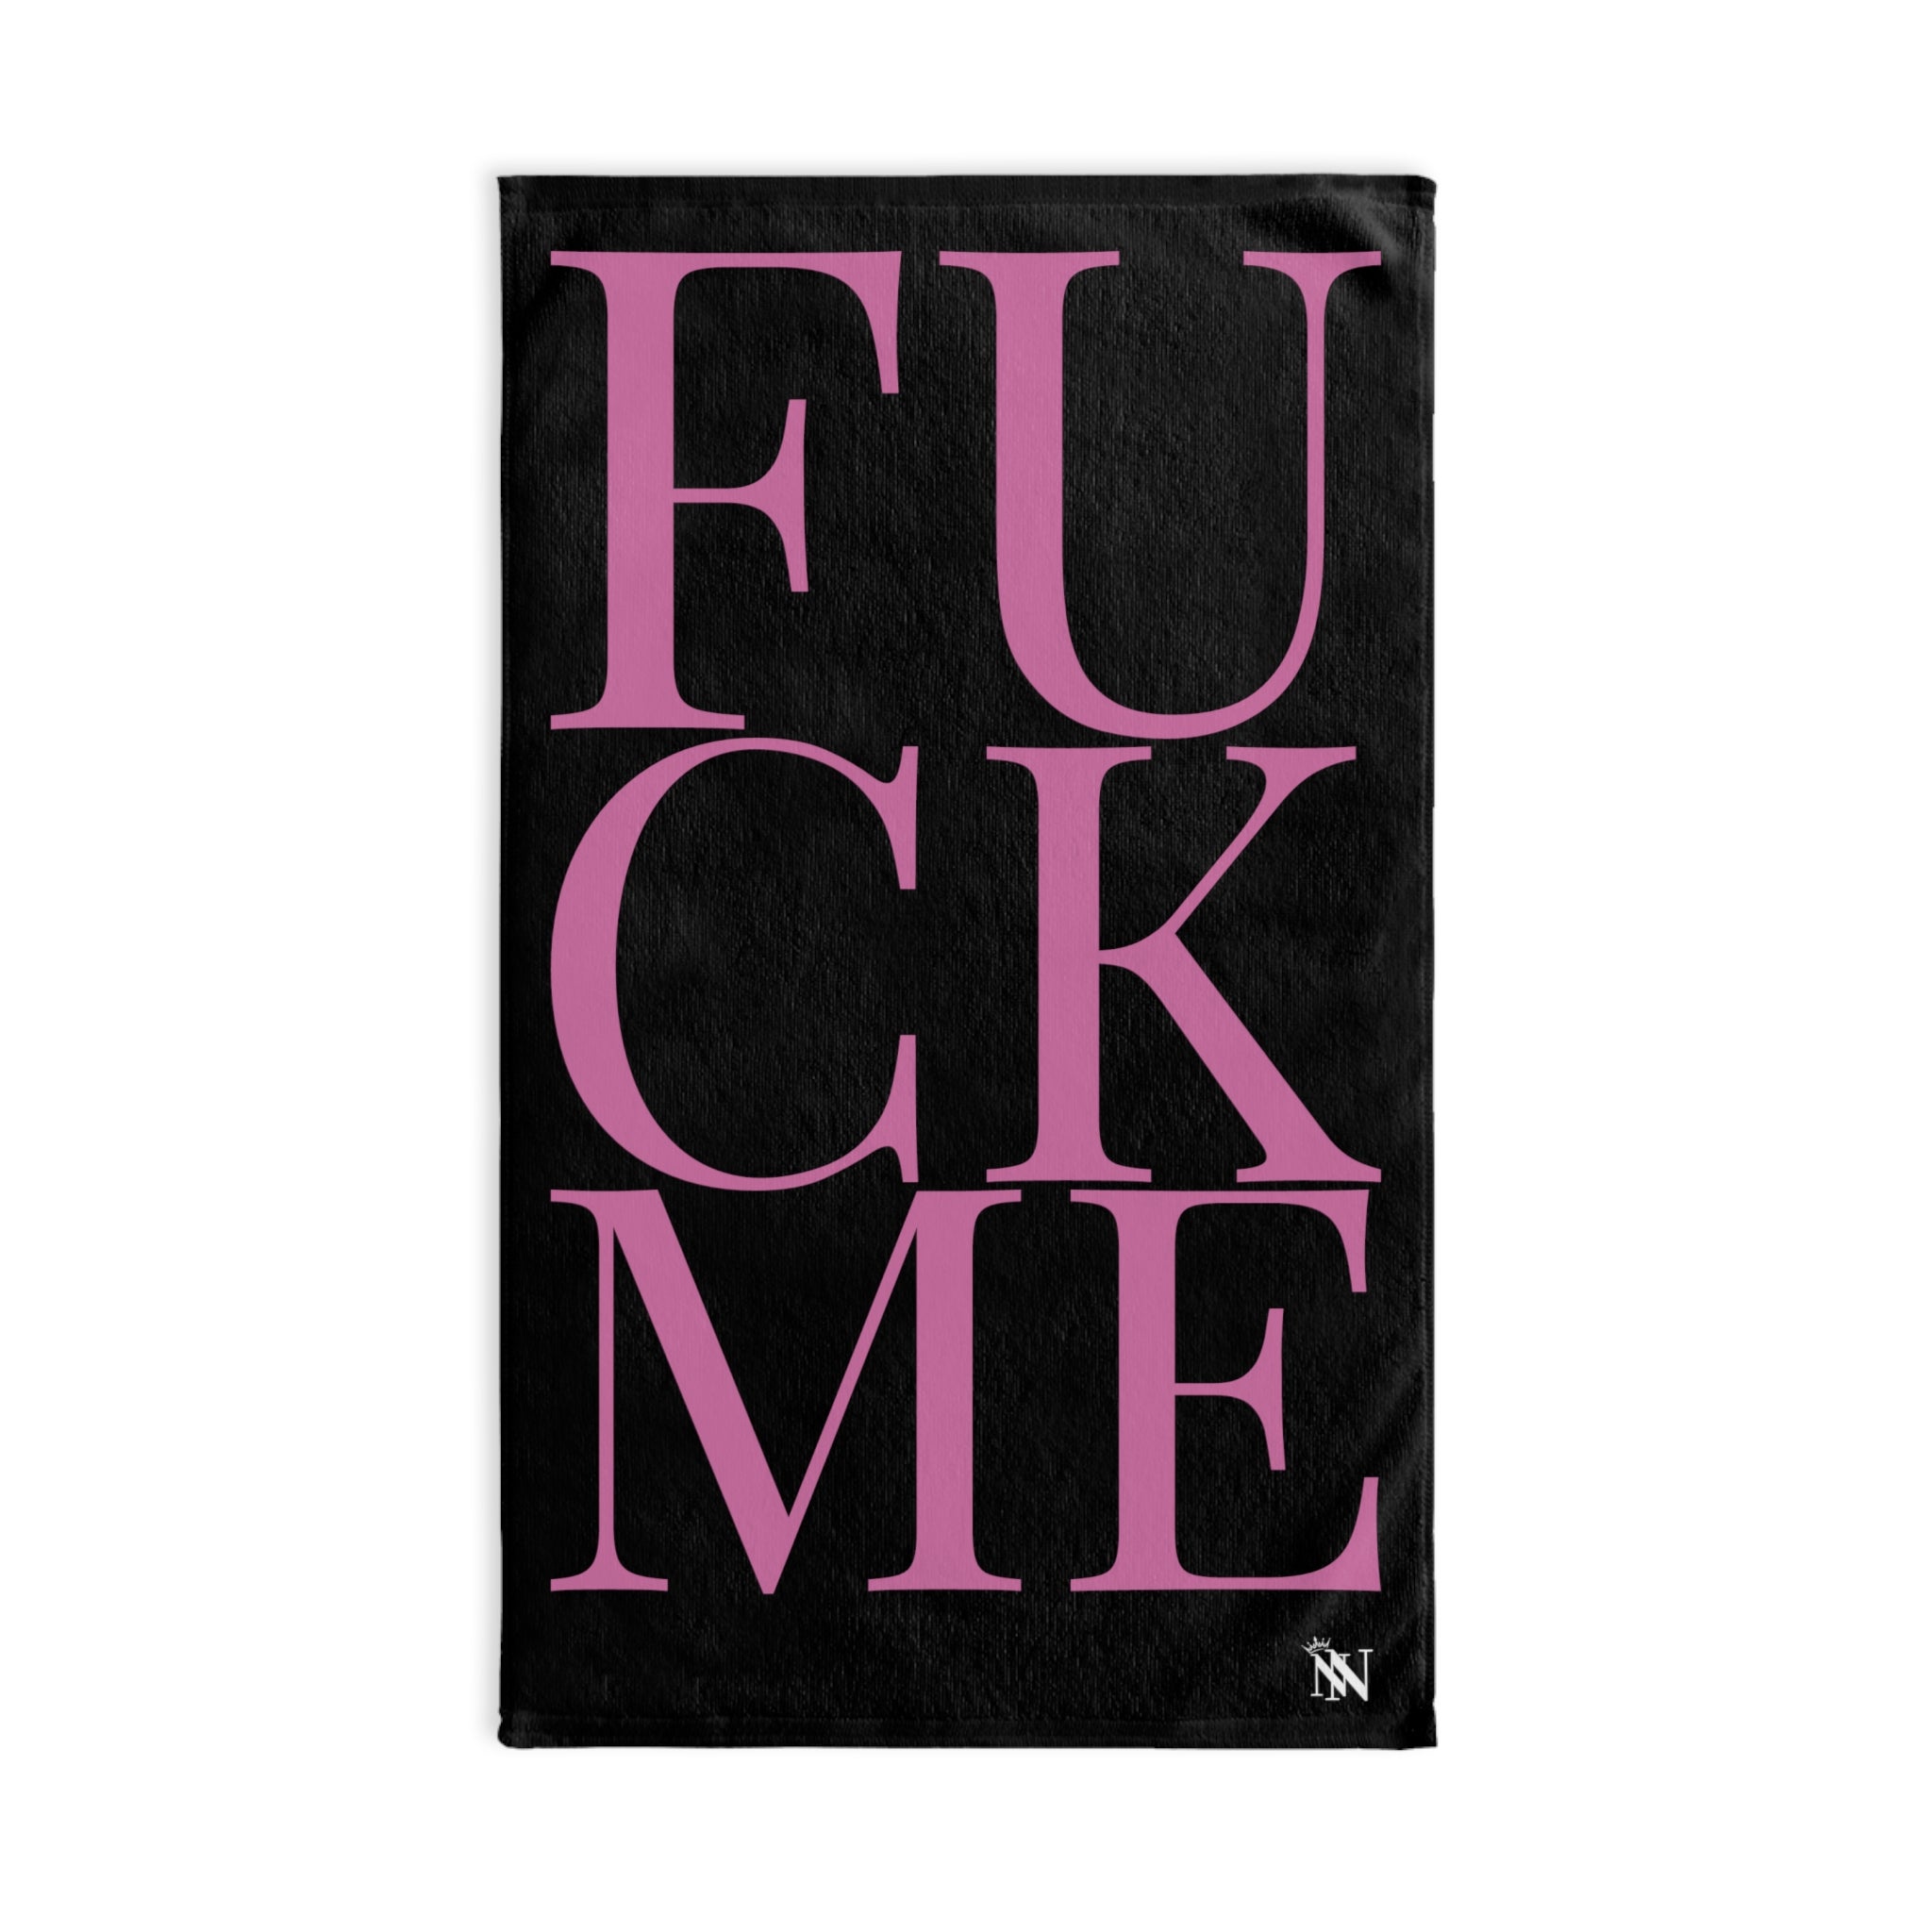 F*ck Me PinkBlack | Sexy Gifts for Boyfriend, Funny Towel Romantic Gift for Wedding Couple Fiance First Year 2nd Anniversary Valentines, Party Gag Gifts, Joke Humor Cloth for Husband Men BF NECTAR NAPKINS